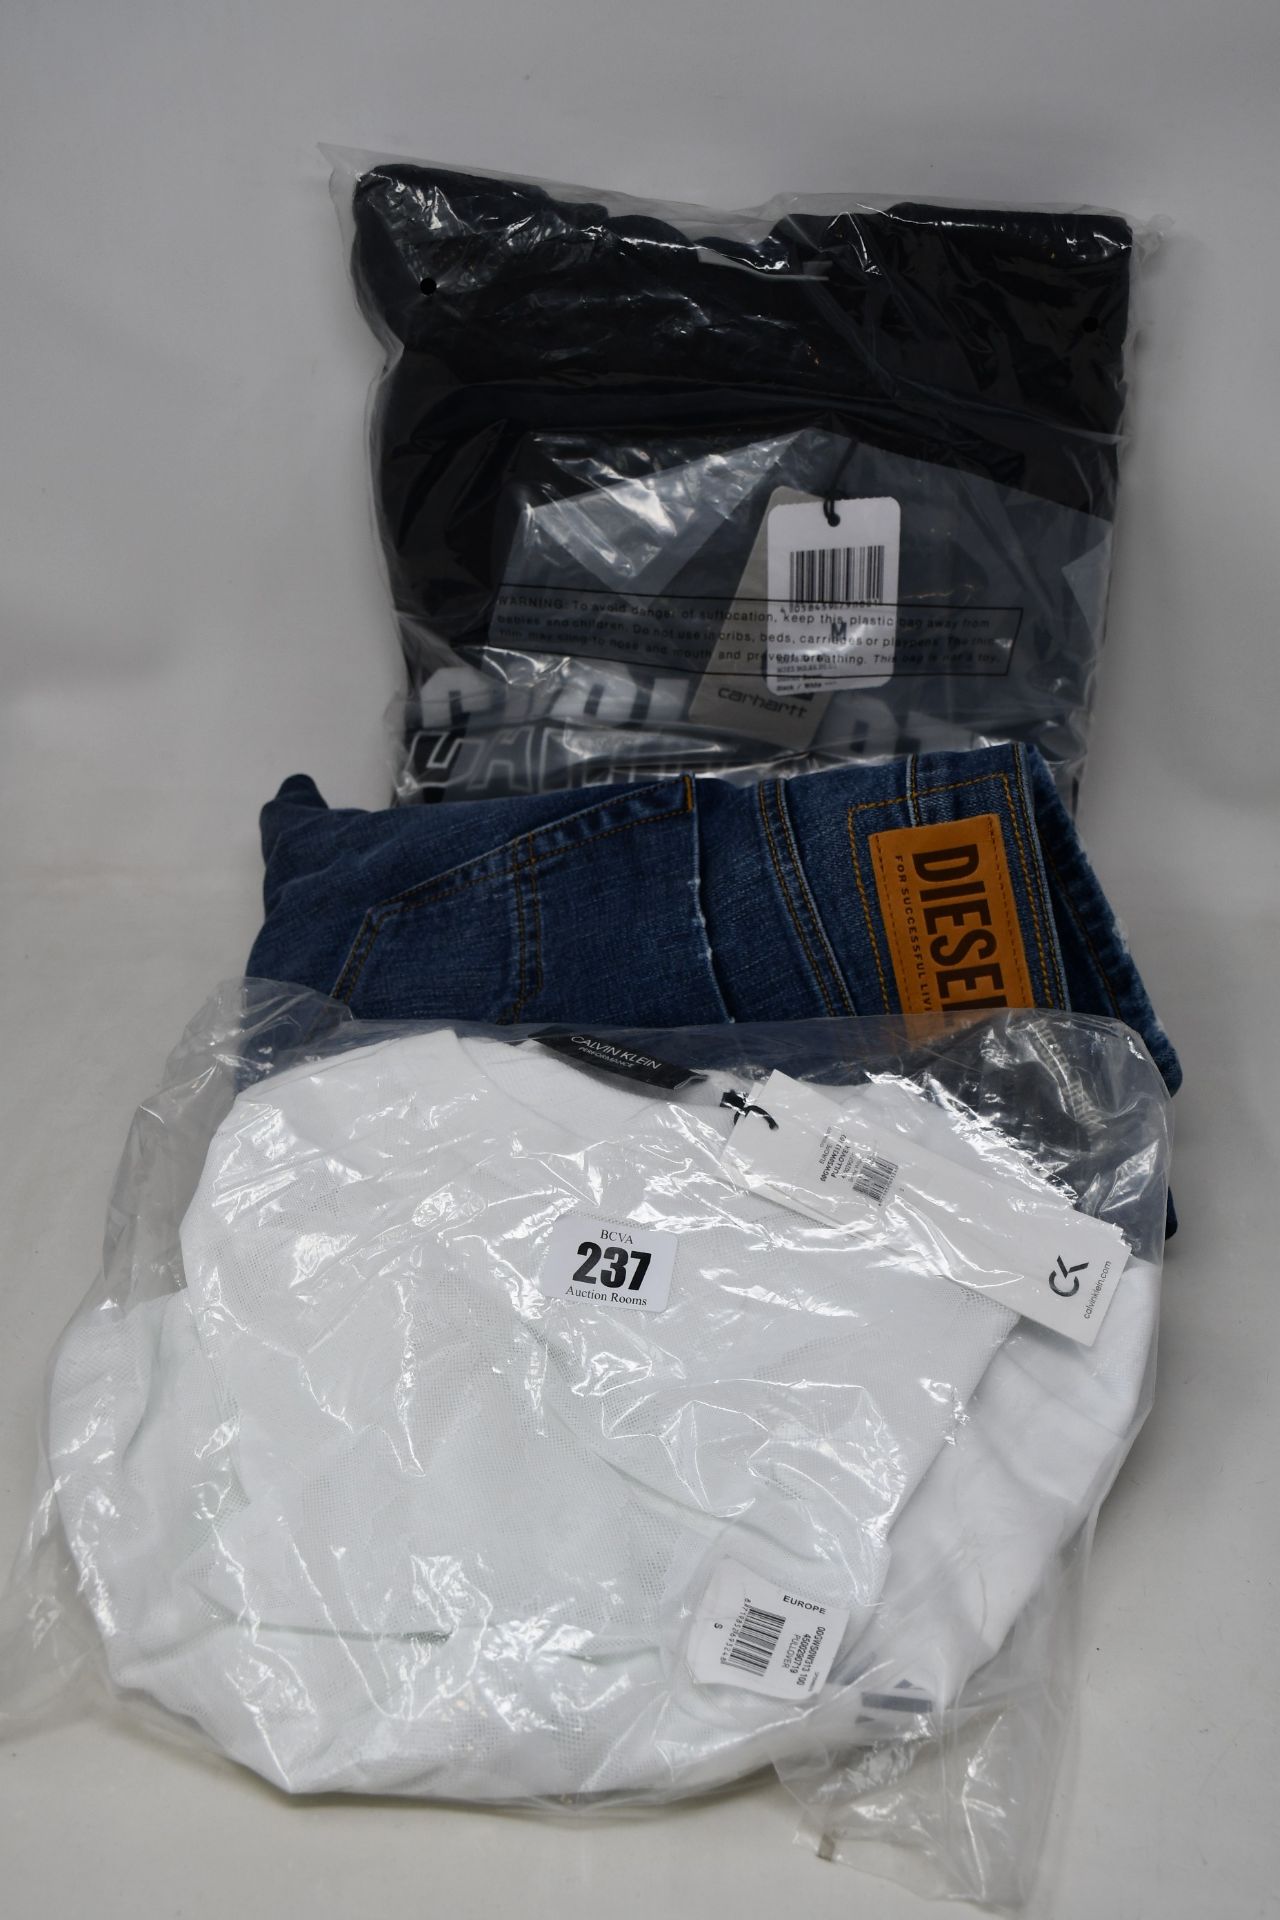 An as new Carhartt District sweater (M - RRP £60), Calvin Klein Performance sweater (S) and a pair